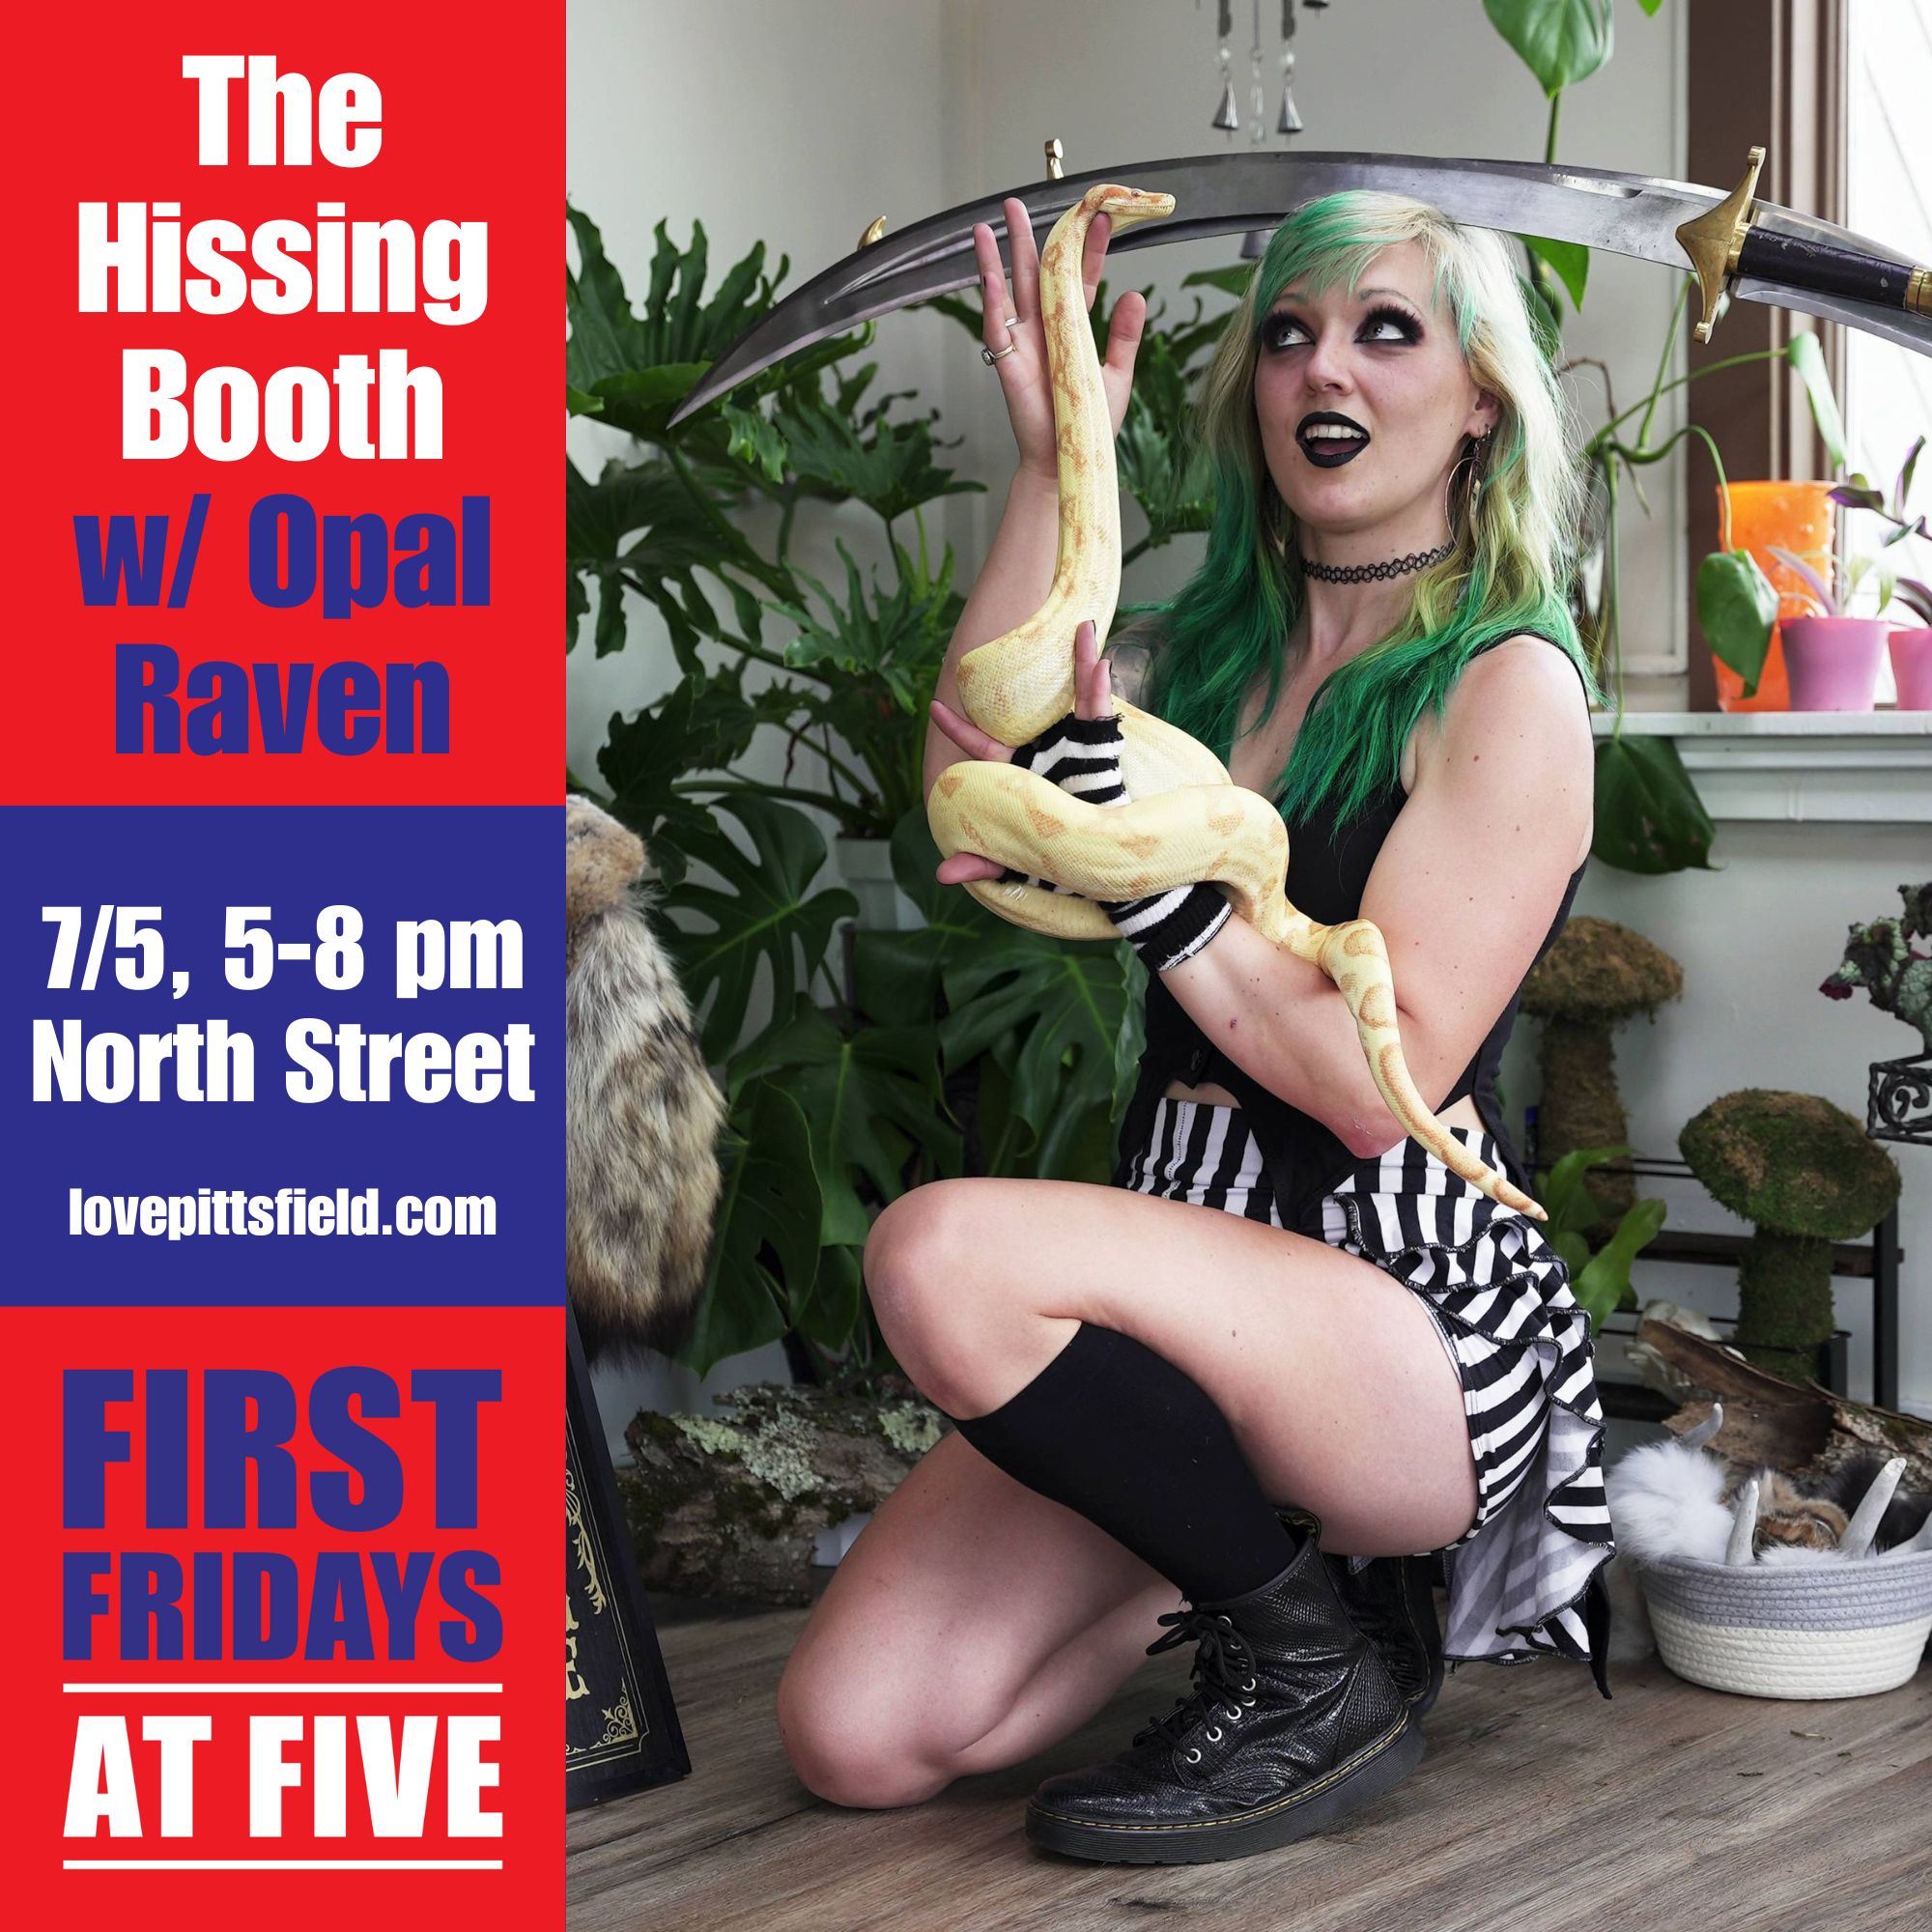 Opal Raven’s The Hissing Booth